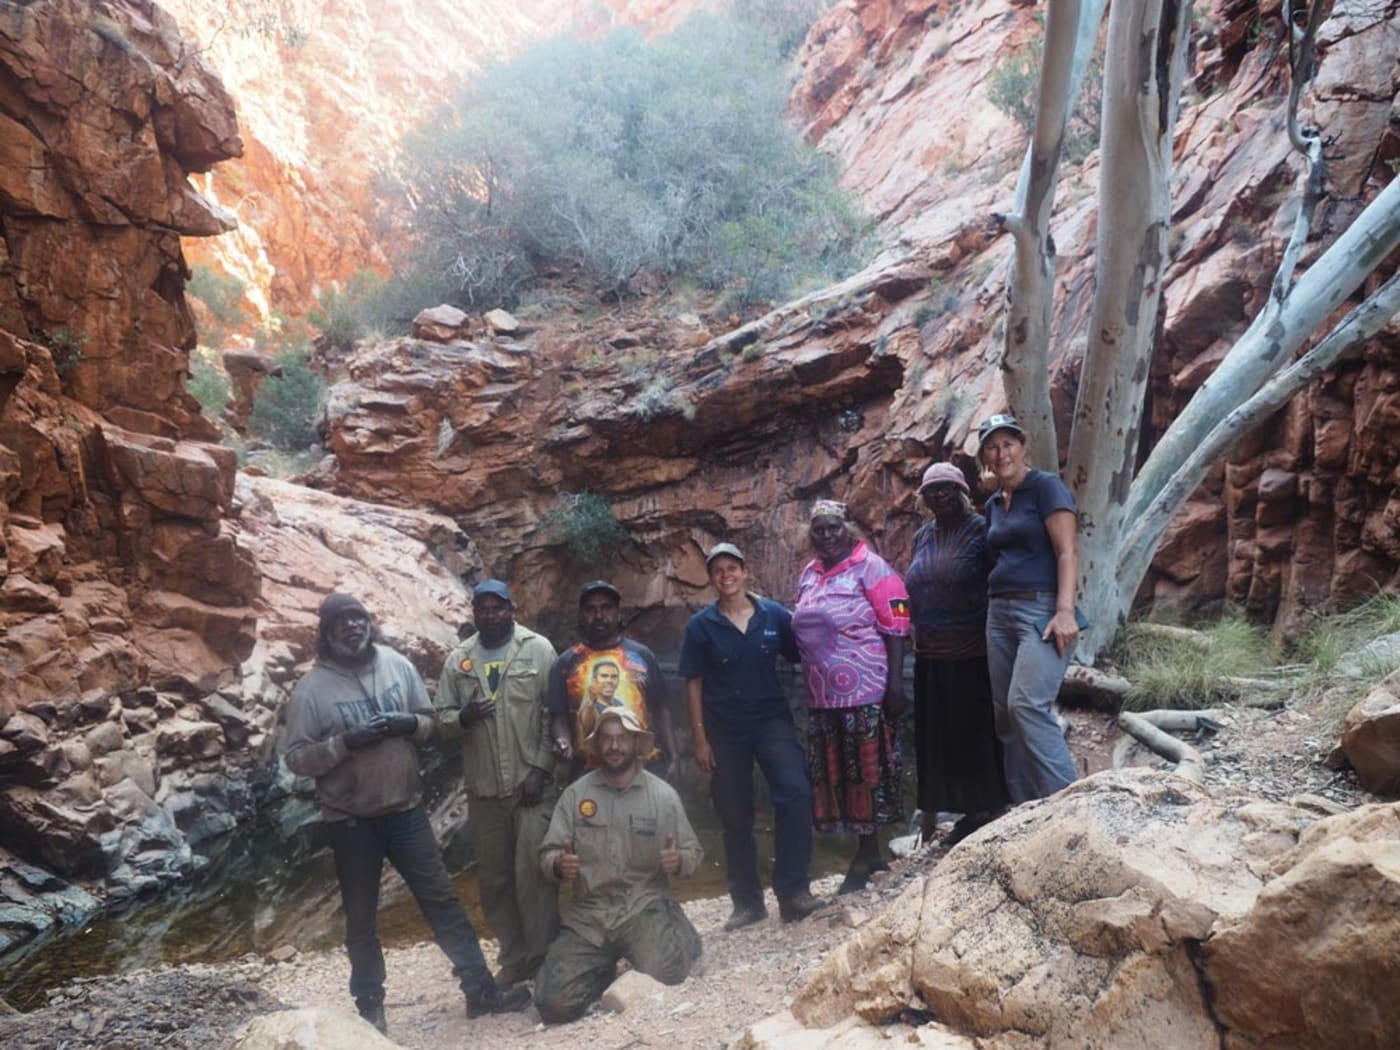 The survey team in the Central Ranges= Western Australia